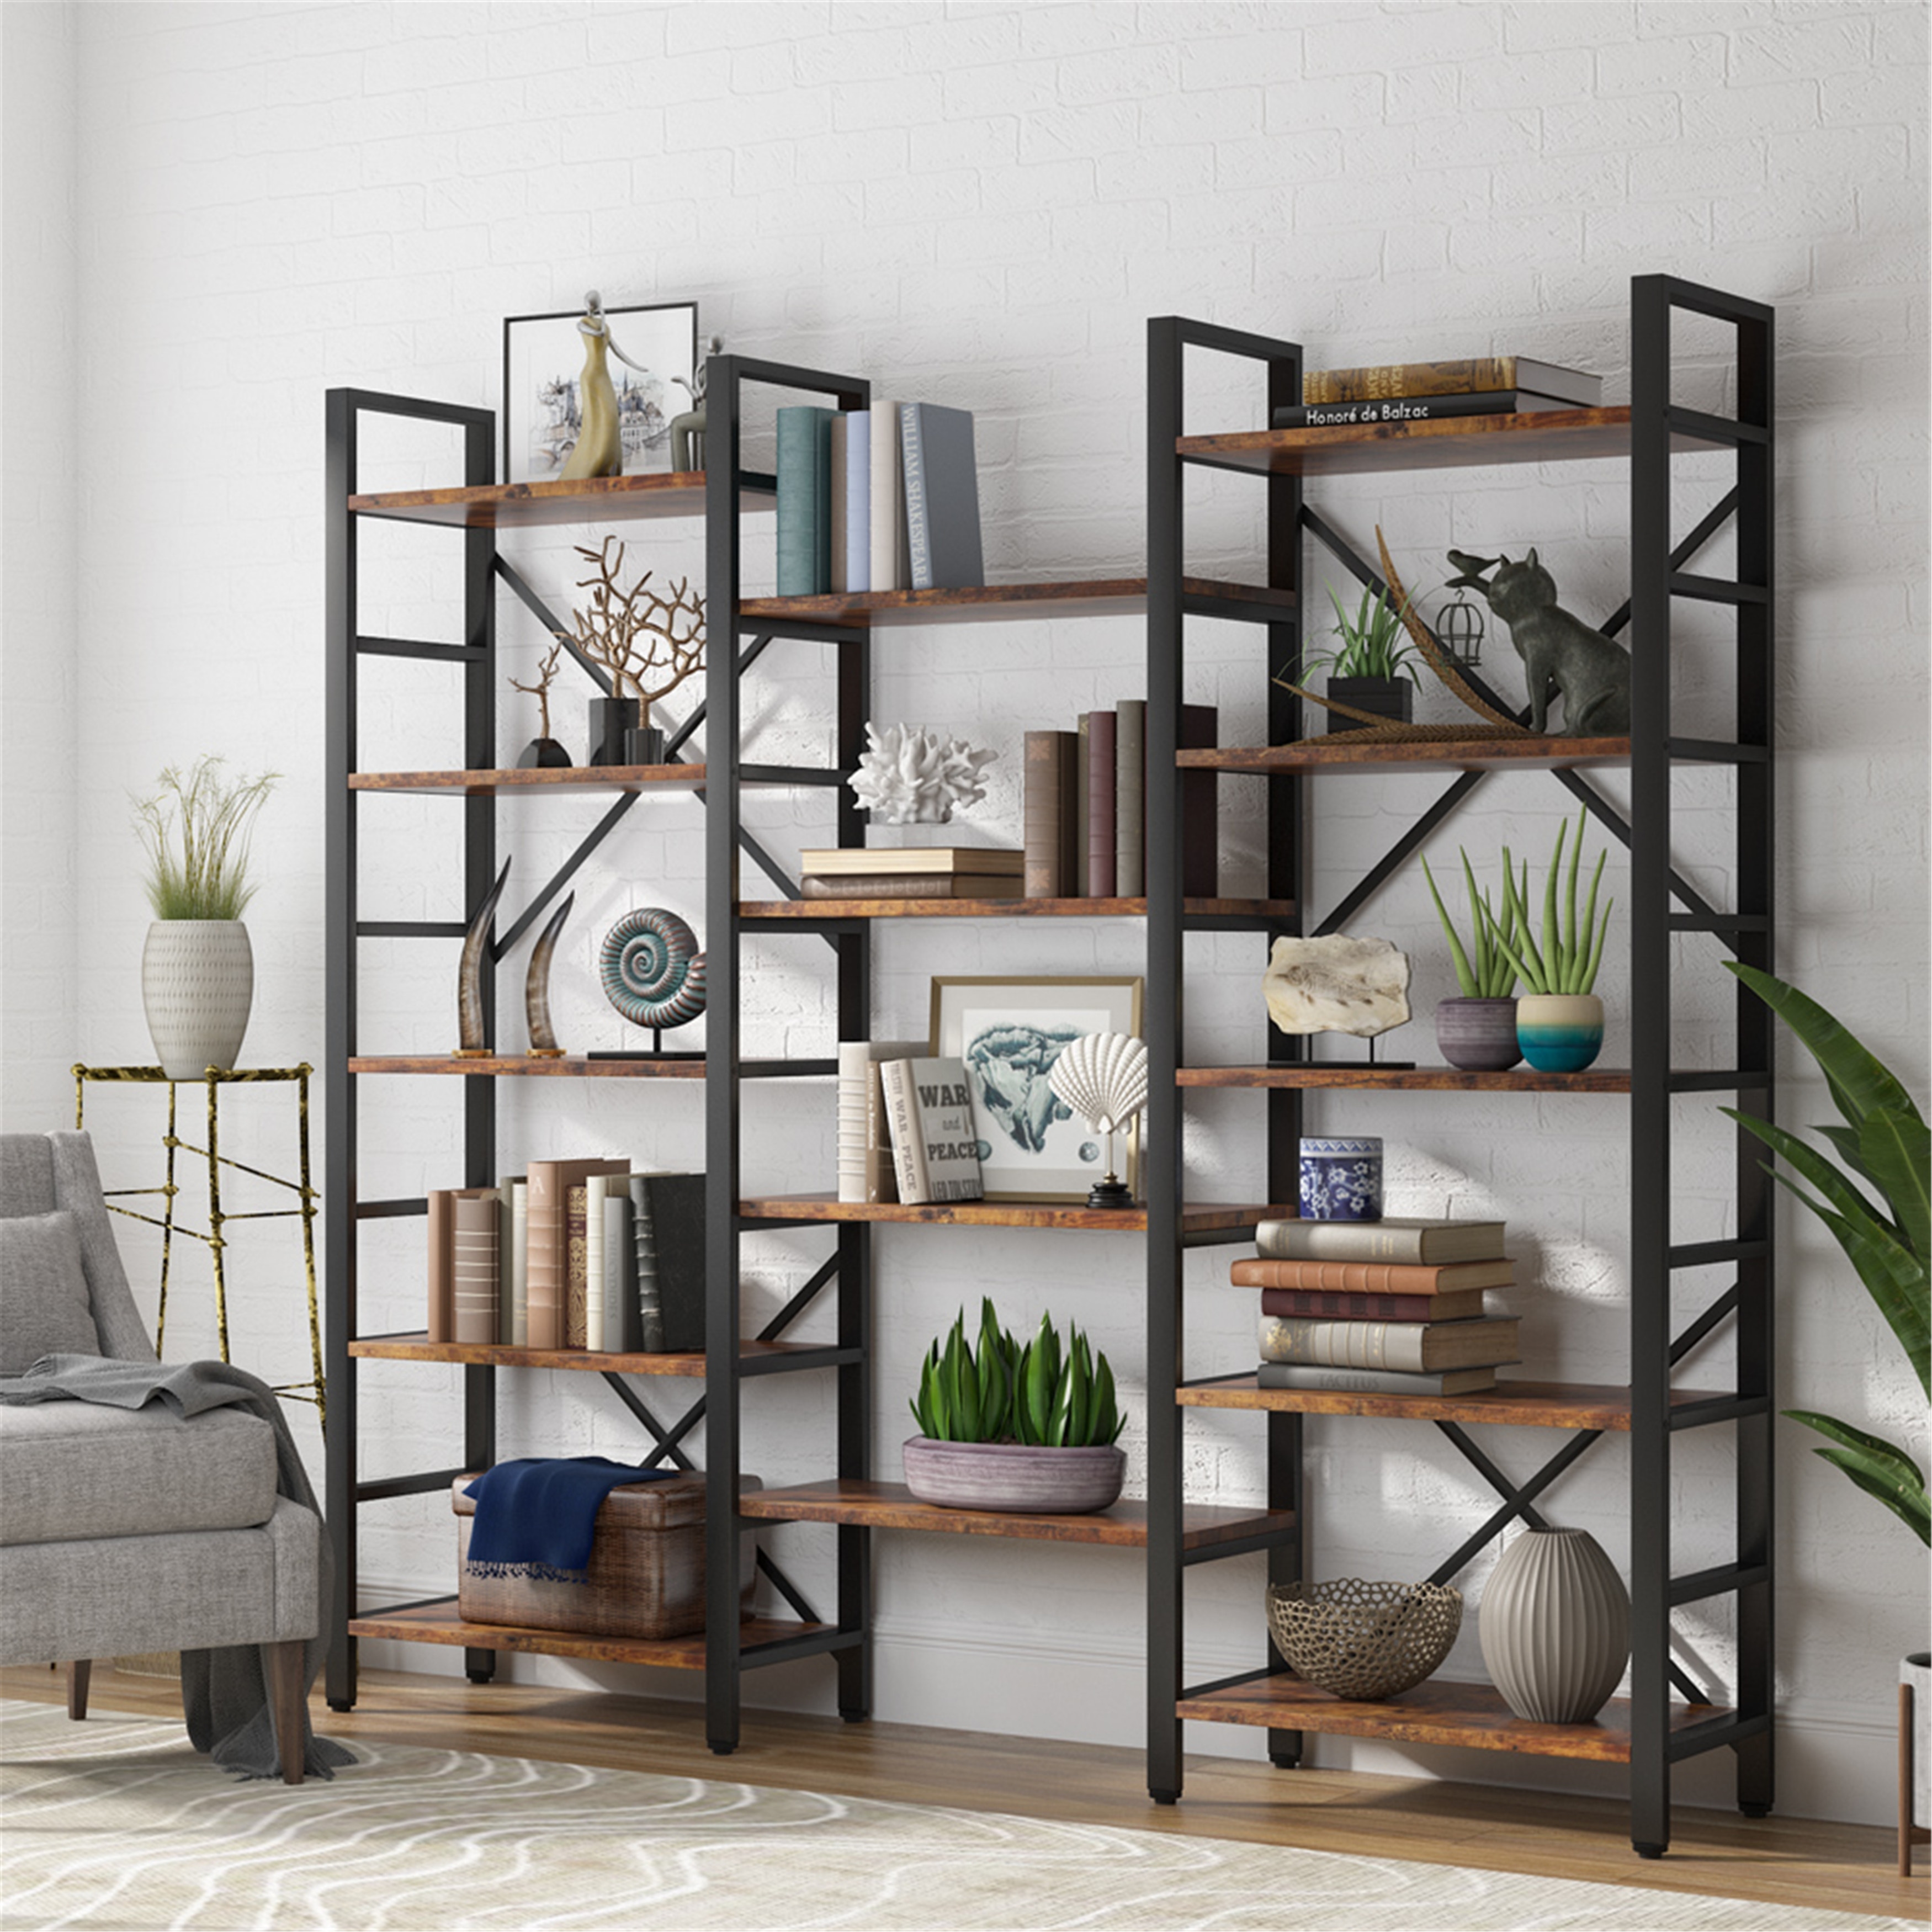 https://ak1.ostkcdn.com/images/products/is/images/direct/217caf2f7d0380f10df66d8b8613bebd4c47d20e/Triple-Wide-5-Shelf-Bookcase%2C-Etagere-Large-Open-Bookshelf.jpg